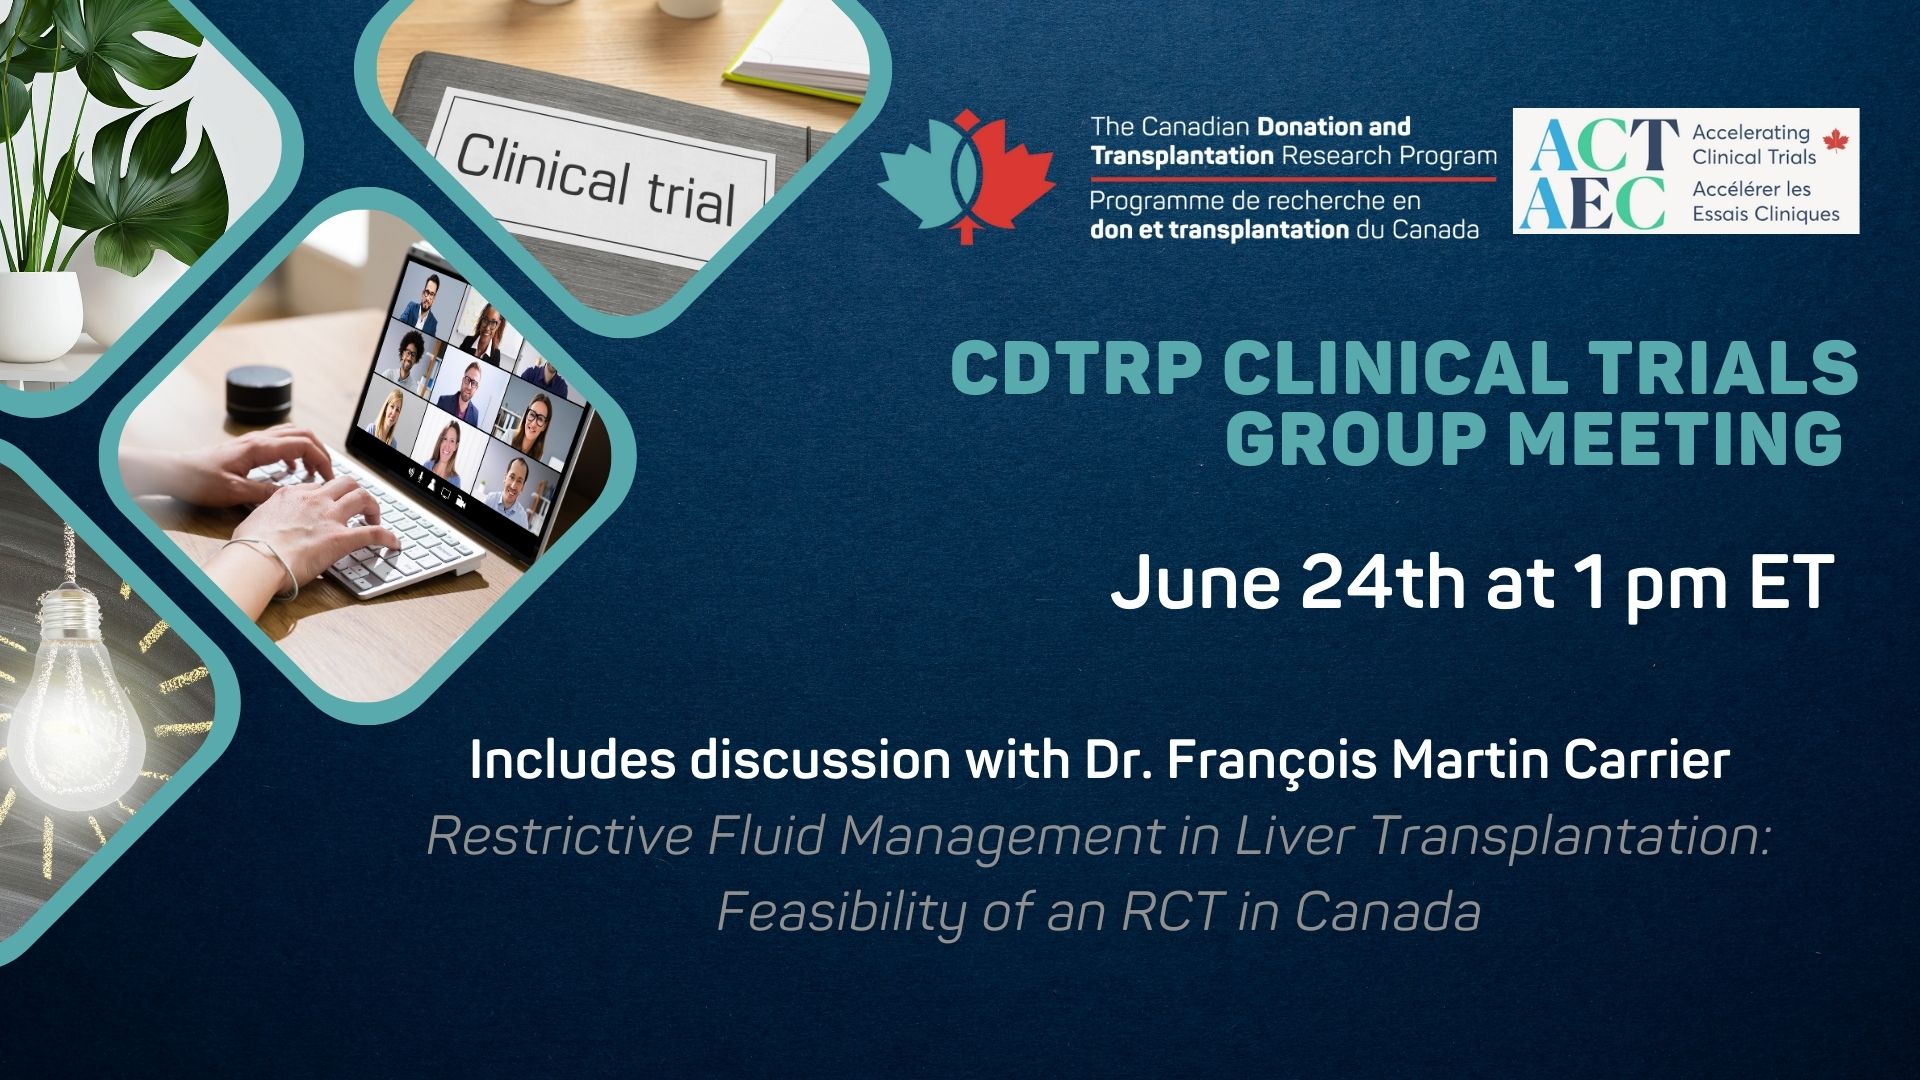 Promo slide for CDTRP Clinical Trials Group